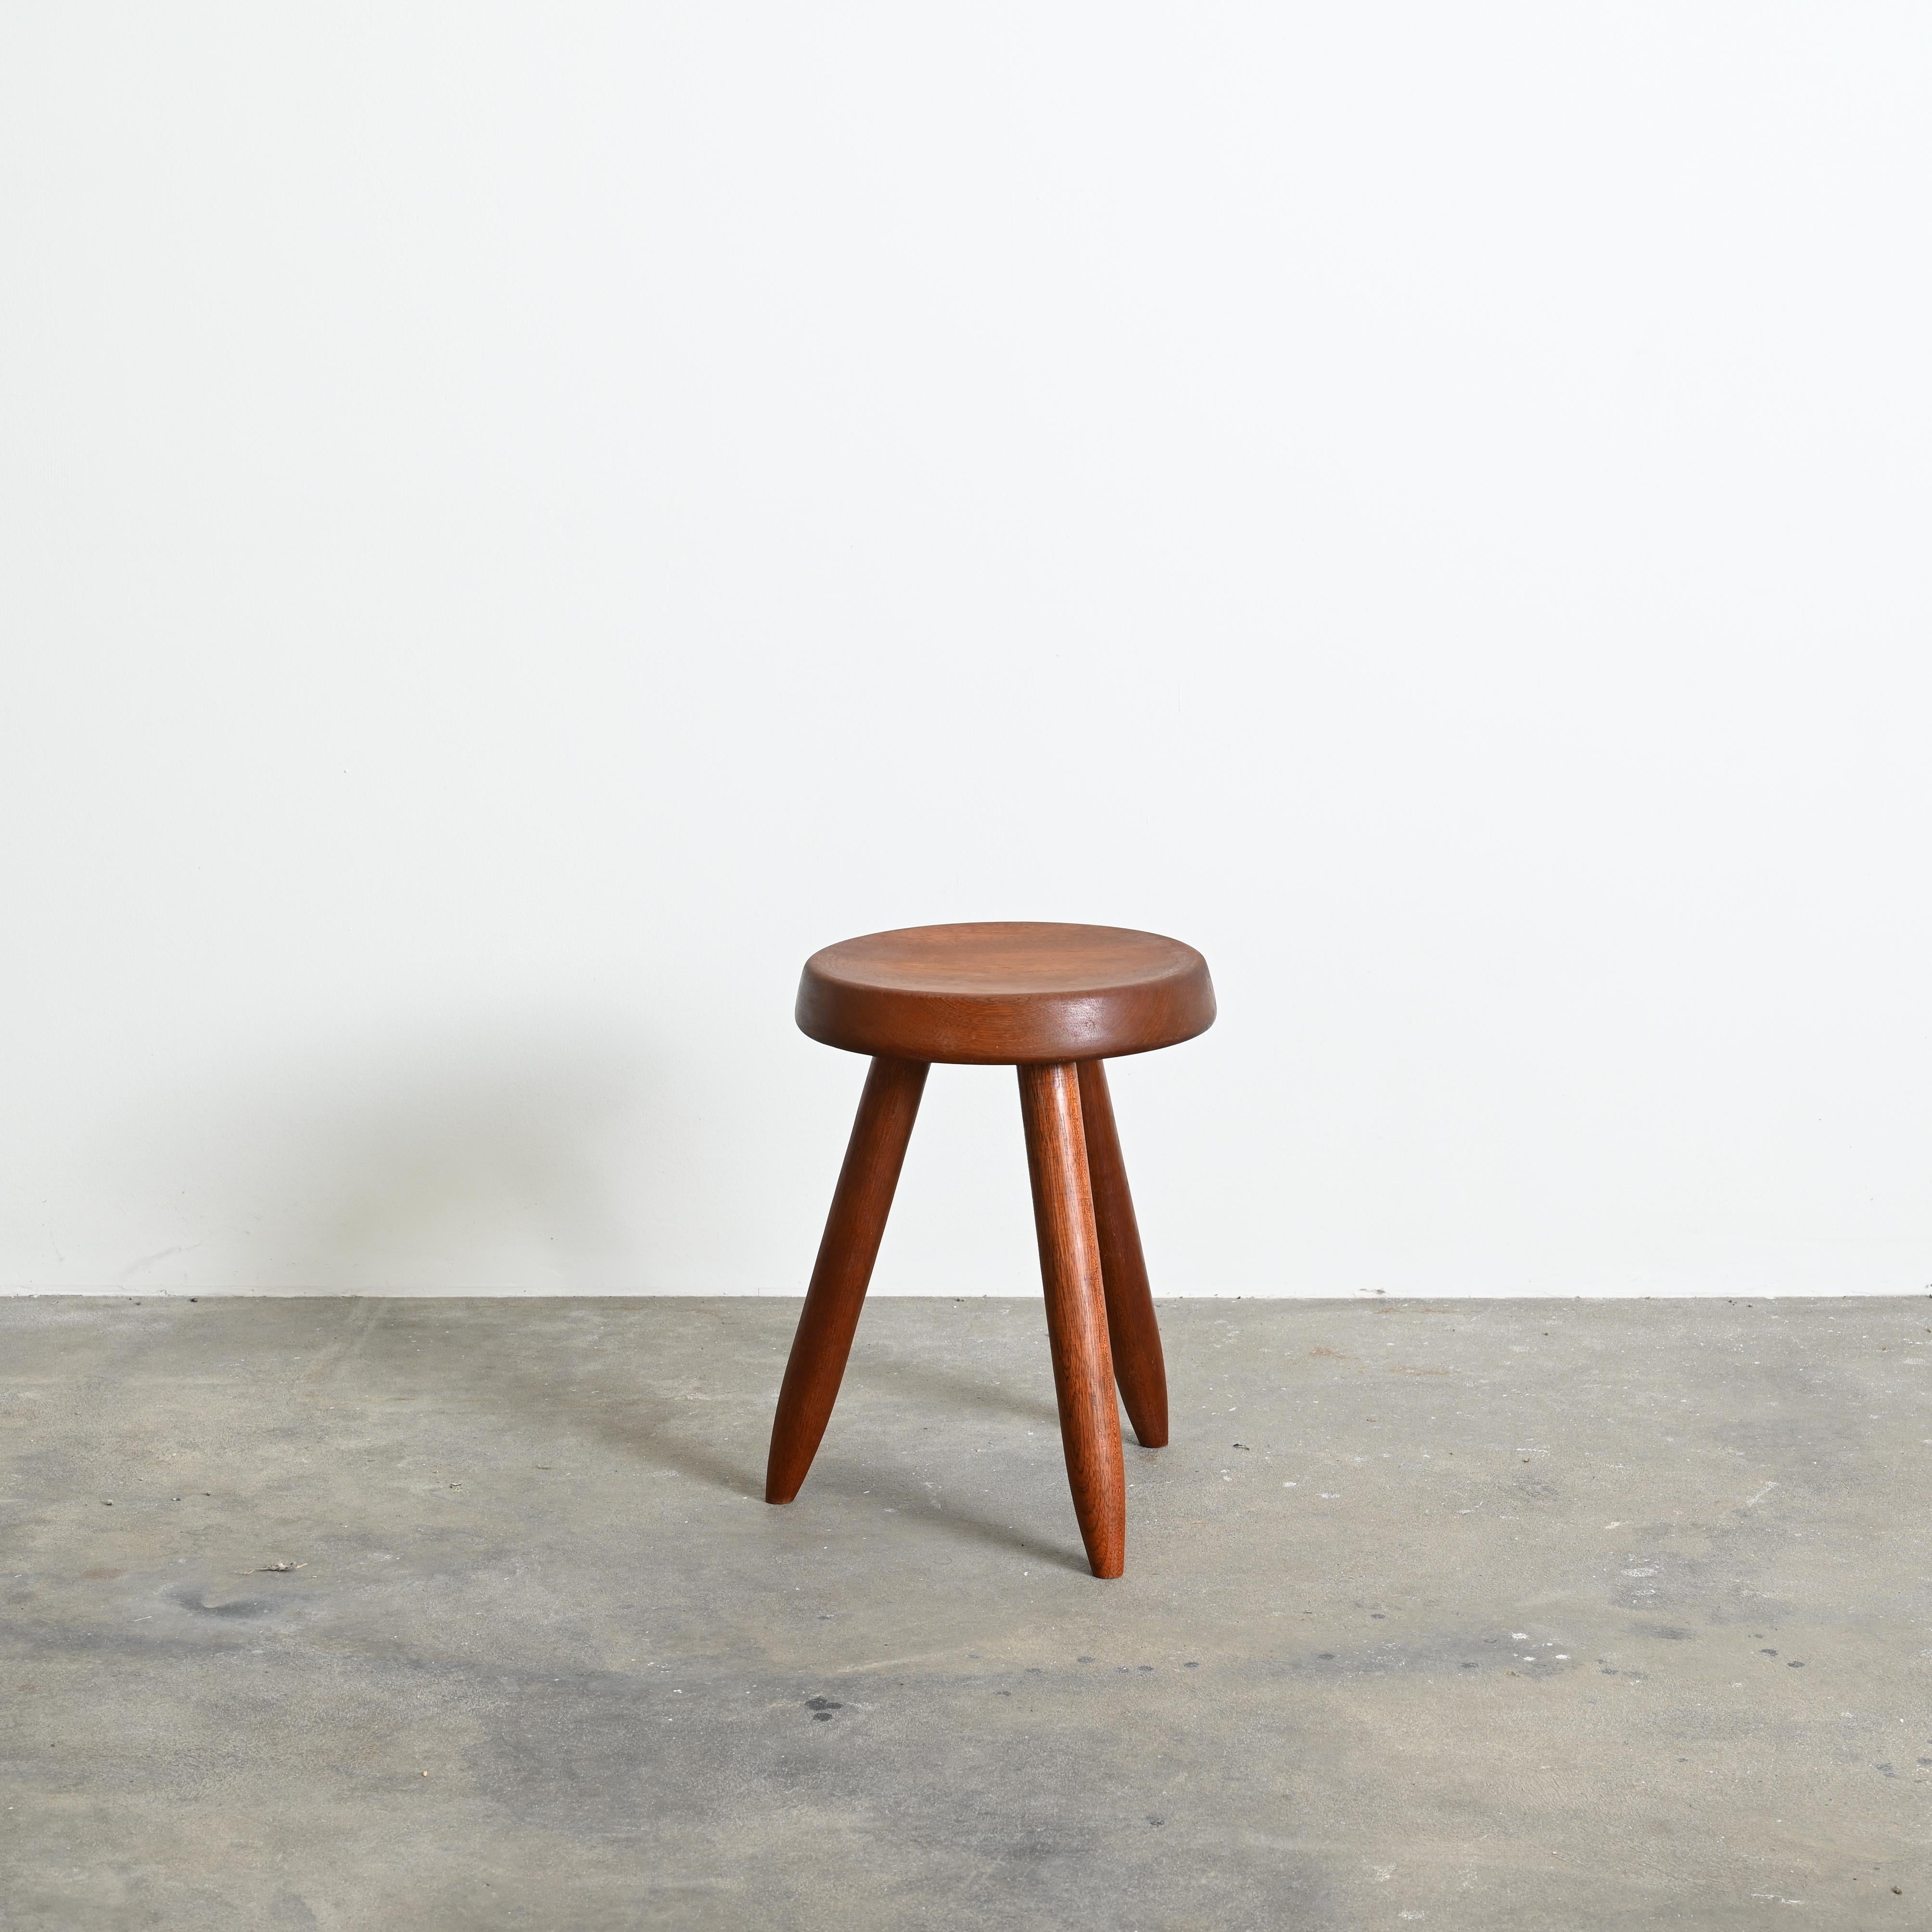 Charlotte Perriand counts as one of the masters of French modernist design together with Le Corbusier, Jean Prouvé or Pierre Jeanneret. Her works are highly valued until the present time and have become design classics.

This stool is not only a